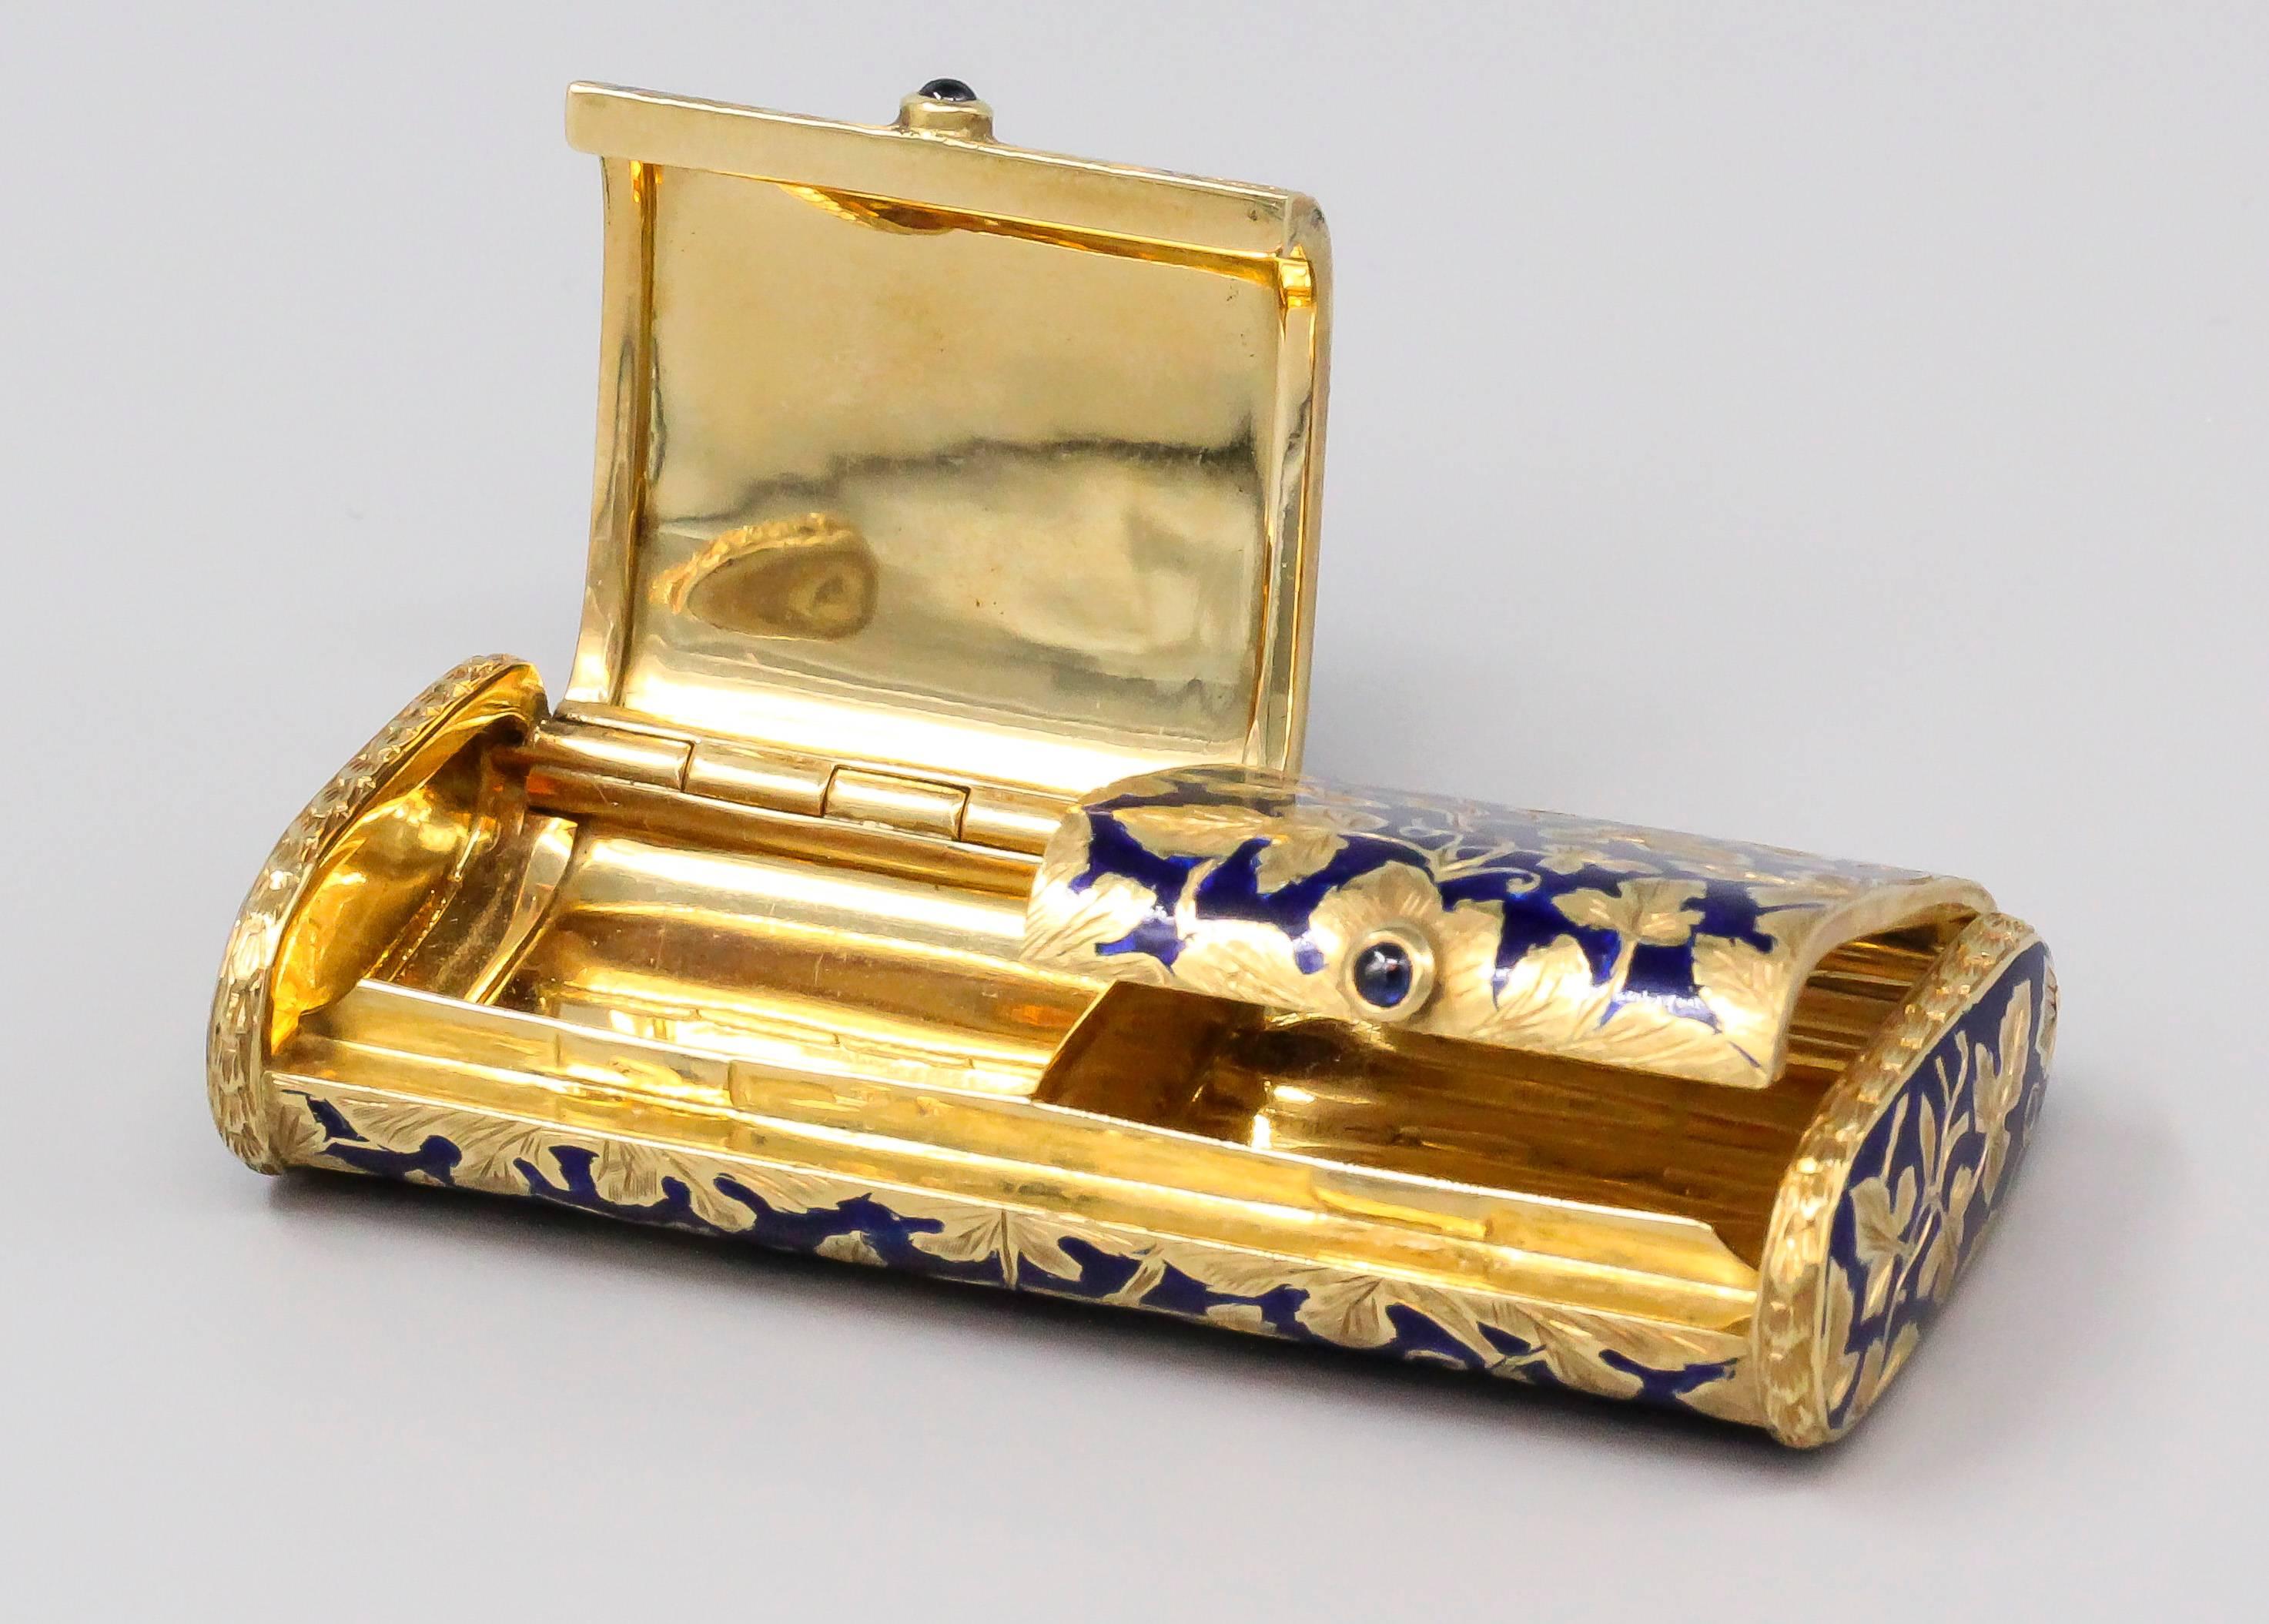 Charming blue sapphire, blue enamel and 18k yellow gold pill box of Italian origin. It features two rich blue cabochon sapphires opening each of the two separate compartments. Very ornate gold designs in the form of leaves over a blue enamel